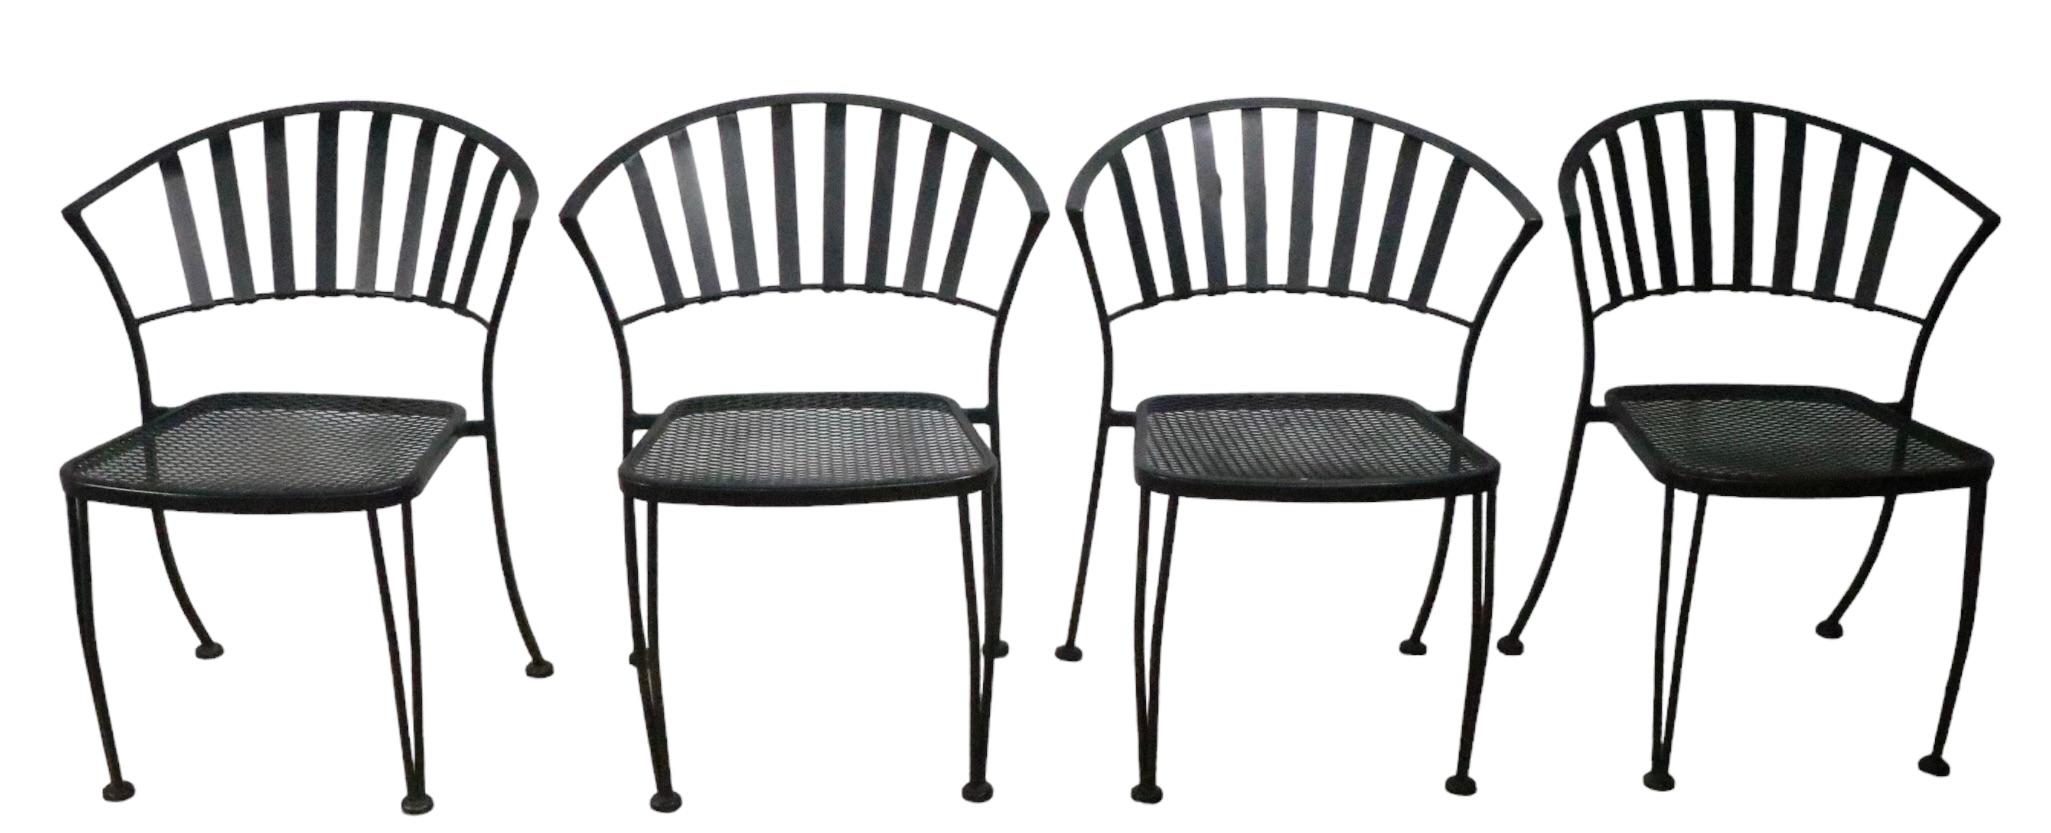 Set of Four Vintage Garden Patio Poolside Metal Strap Dining Chairs For Sale 2